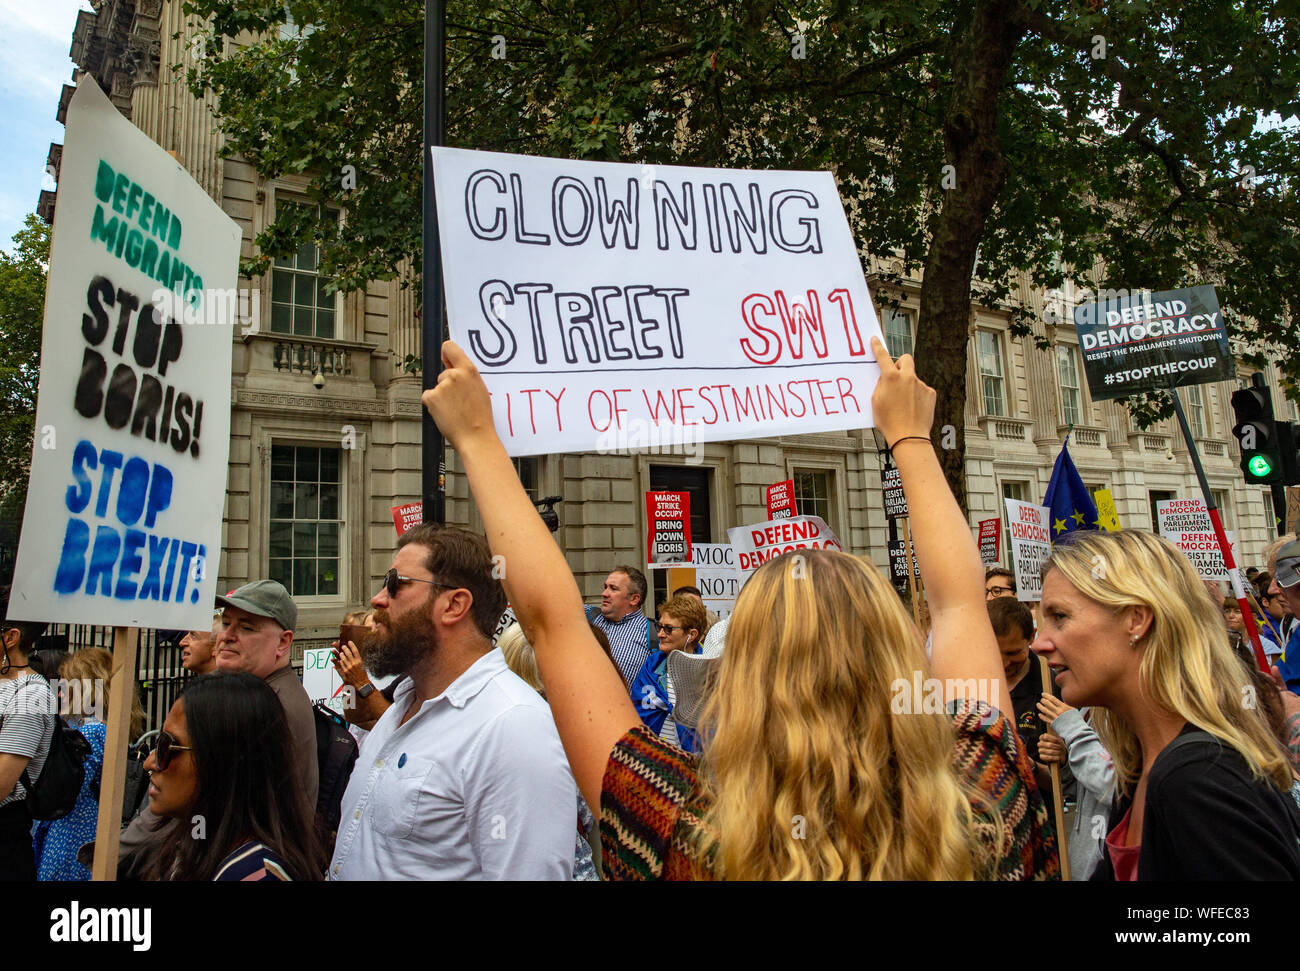 UK. 31st Aug, 2019. Demonstrators in Whitehall protesting against the Government's decision to prorogue Parliament which gives very little time for debate ahead of the October 31st dealine to leave the European Union. The 'Stop the Coup' movement protesting at the gates of 10 Downing Street. Credit: Tommy London/Alamy Live News Stock Photo